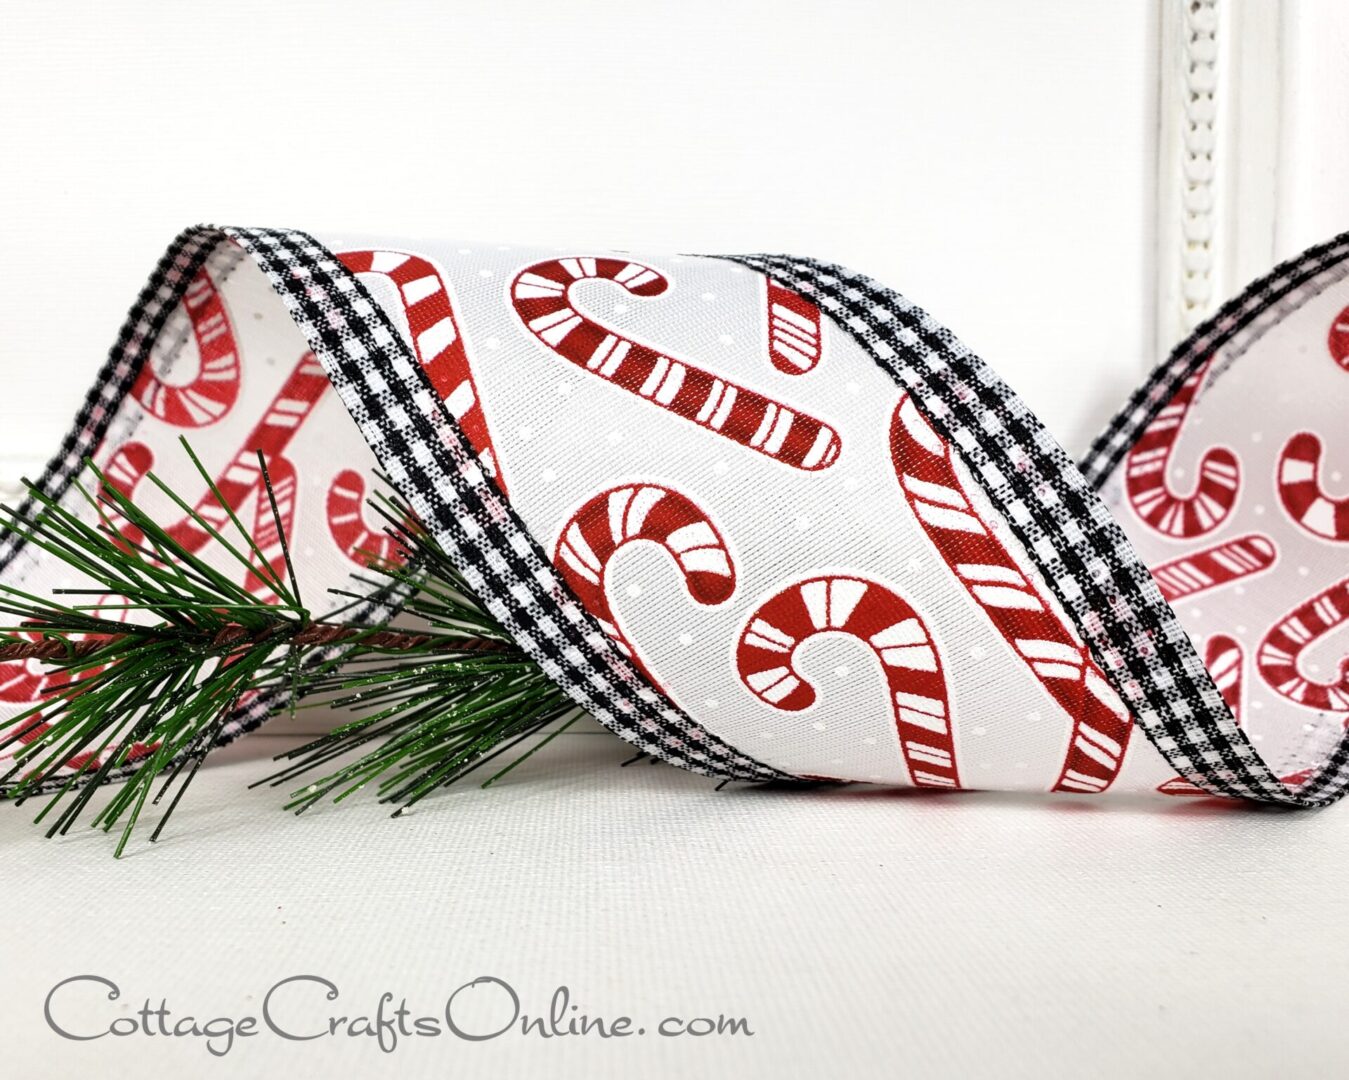 Red and white candy canes with black and white gingham edge 2.5" wide wired ribbon from the Etsy shop of Cottage Crafts Online.